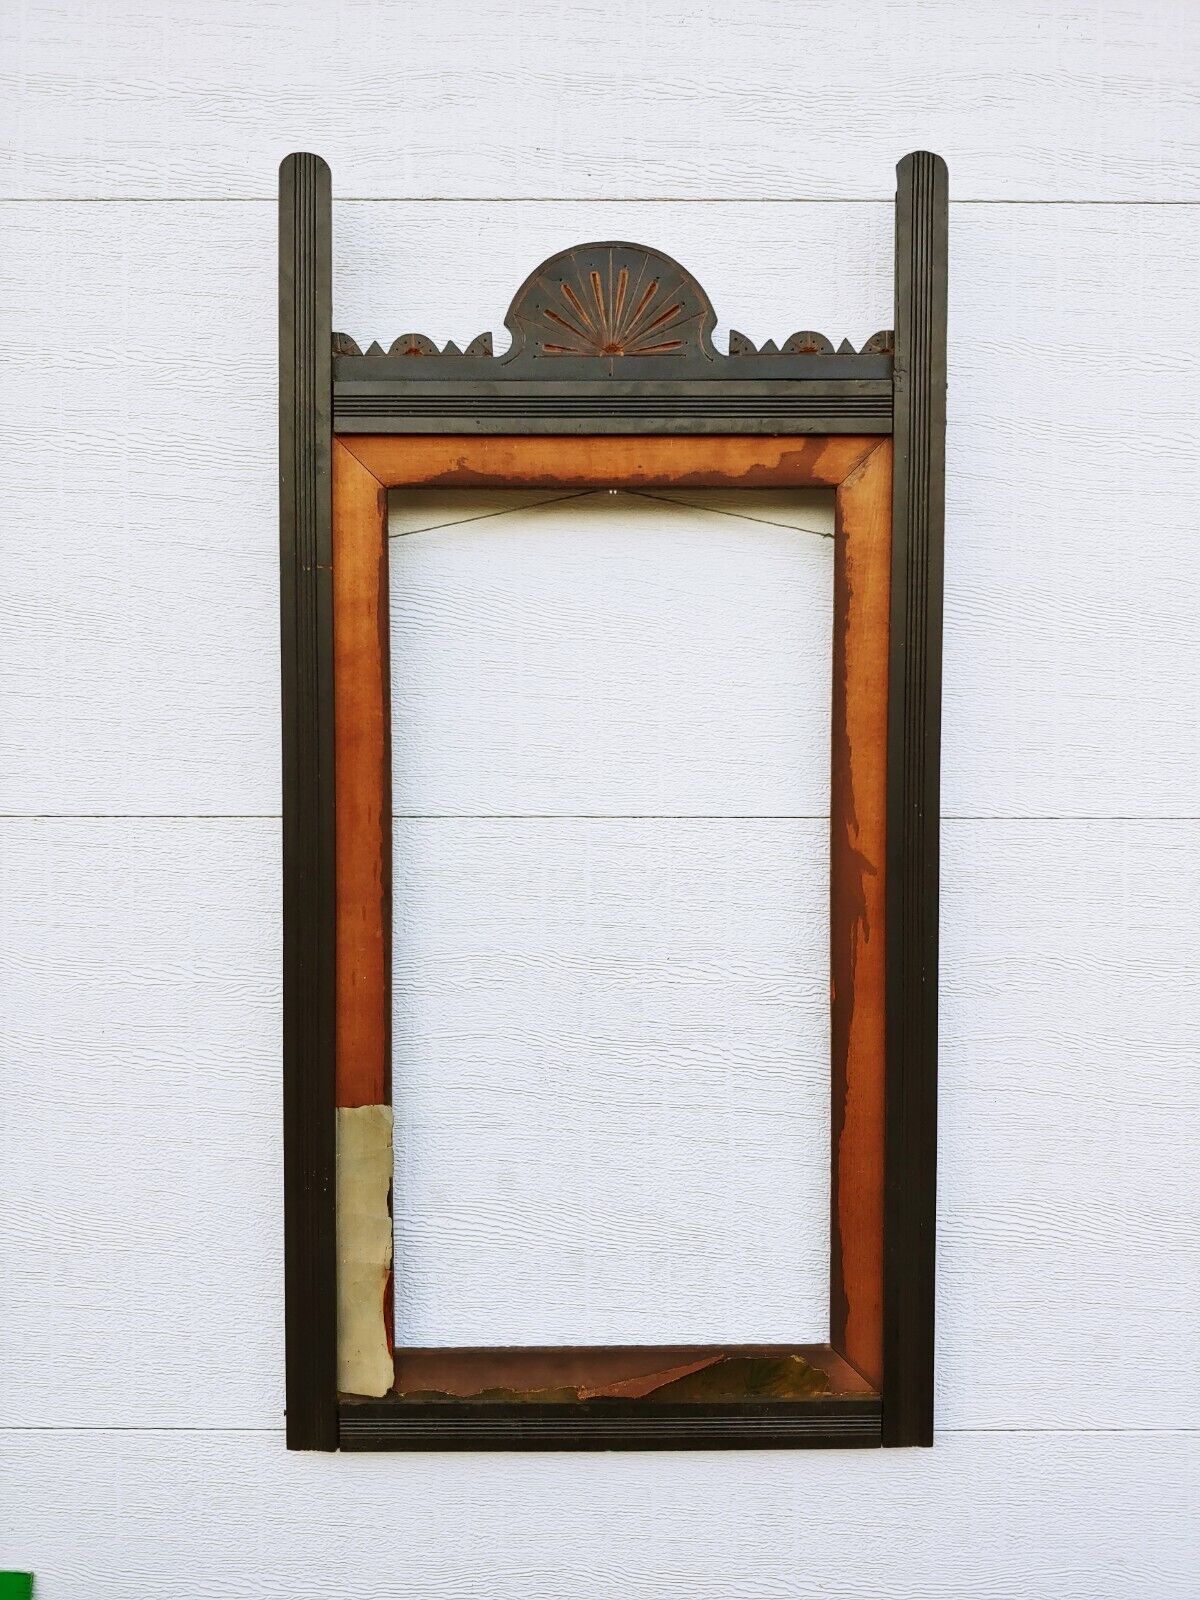 Circa 1860s-80s Eastlake Style Wood Frame For Art Paintings 37\